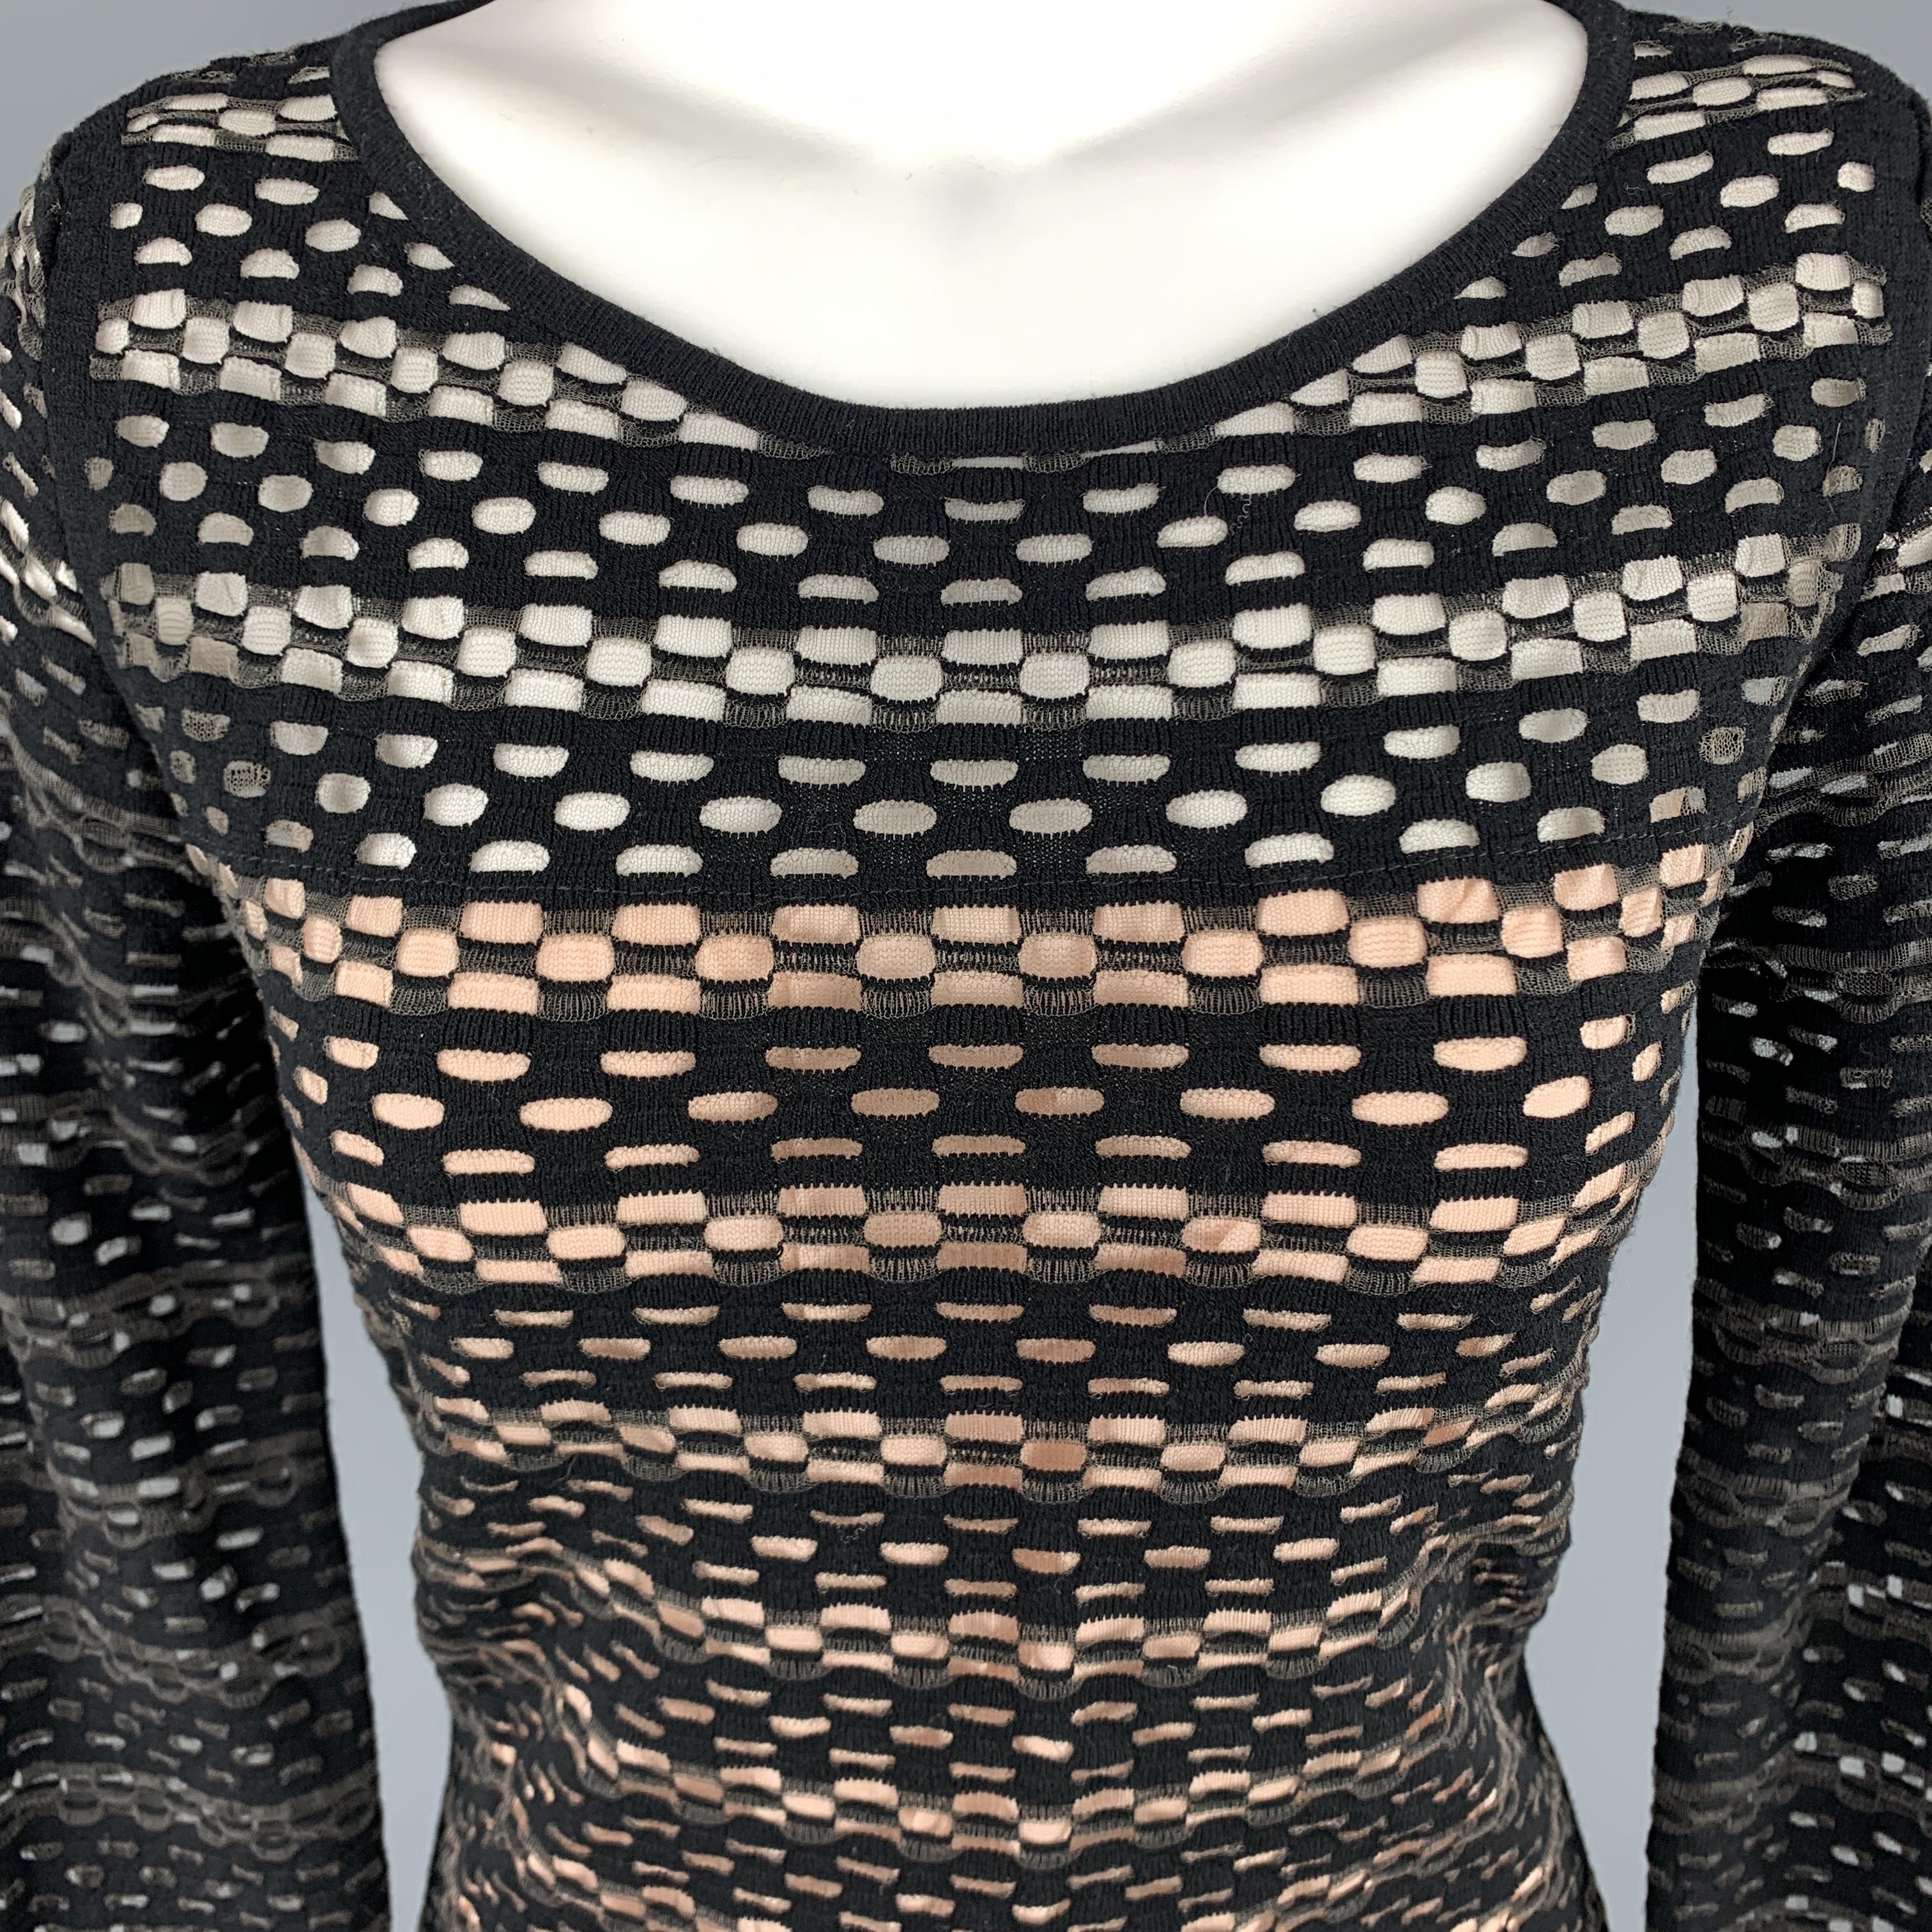 ESCADA top comes in see through stretch mesh with a black and grey opaque stripes, scoop neck, cropped sleeves, and beige liner.  Made in Italy.

Excellent Pre-Owned Condition.
Marked: S

Measurements:

Shoulder: 14 in.
Bust: 34 in.
Sleeve: 20